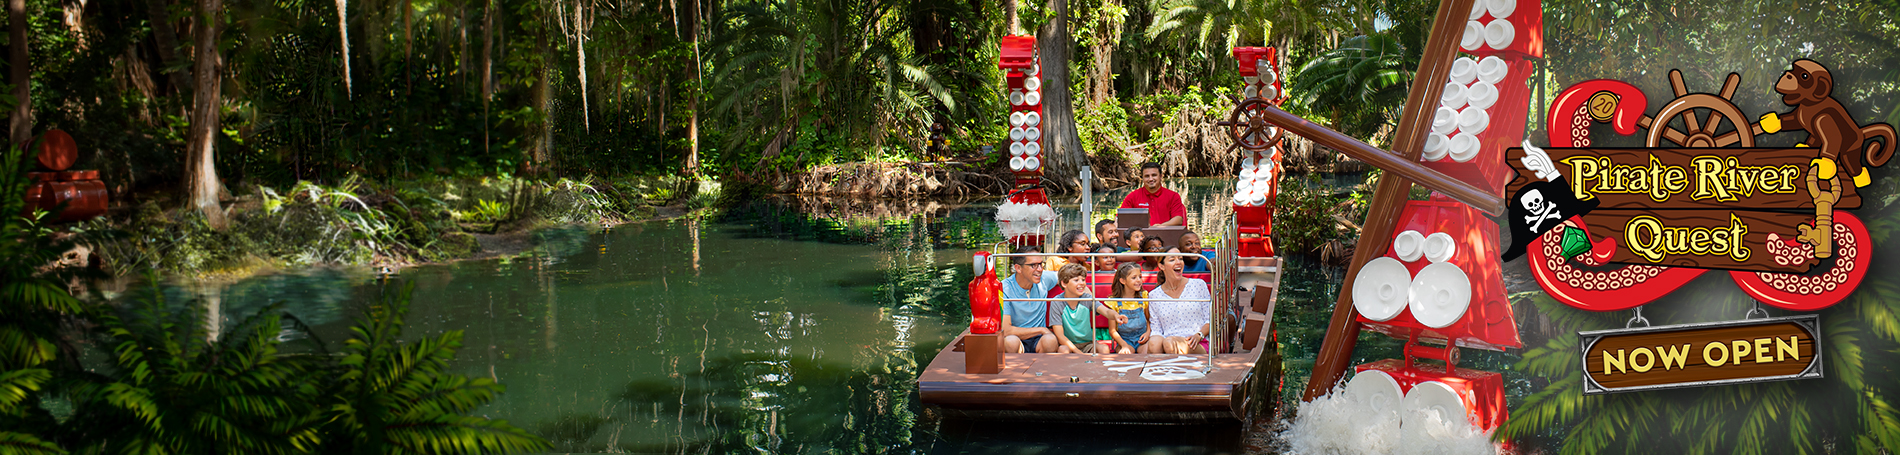 Pirate River Quest is Now Open